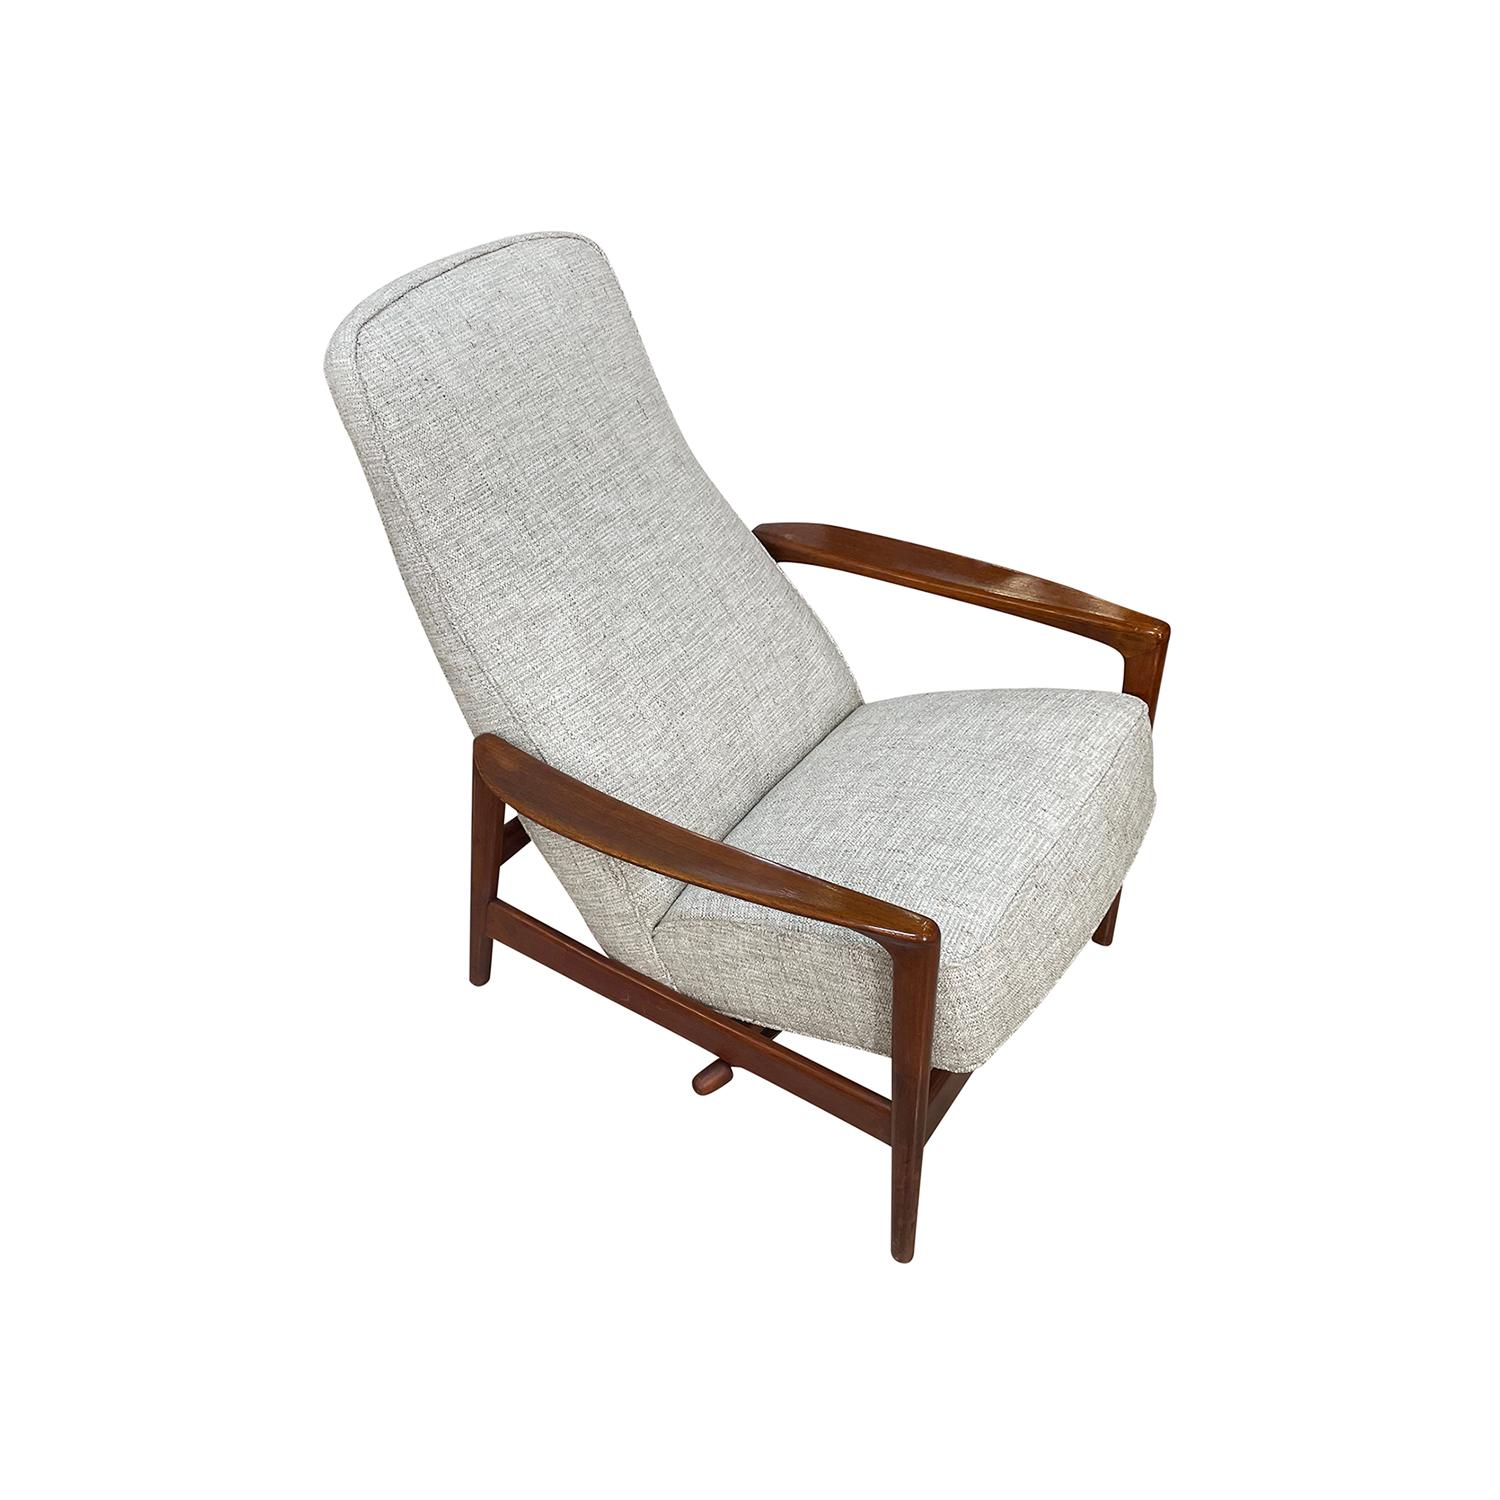 20th Century Swedish Vintage High Back Beech Recliner Set by Folke Ohlsson & Dux In Good Condition For Sale In West Palm Beach, FL